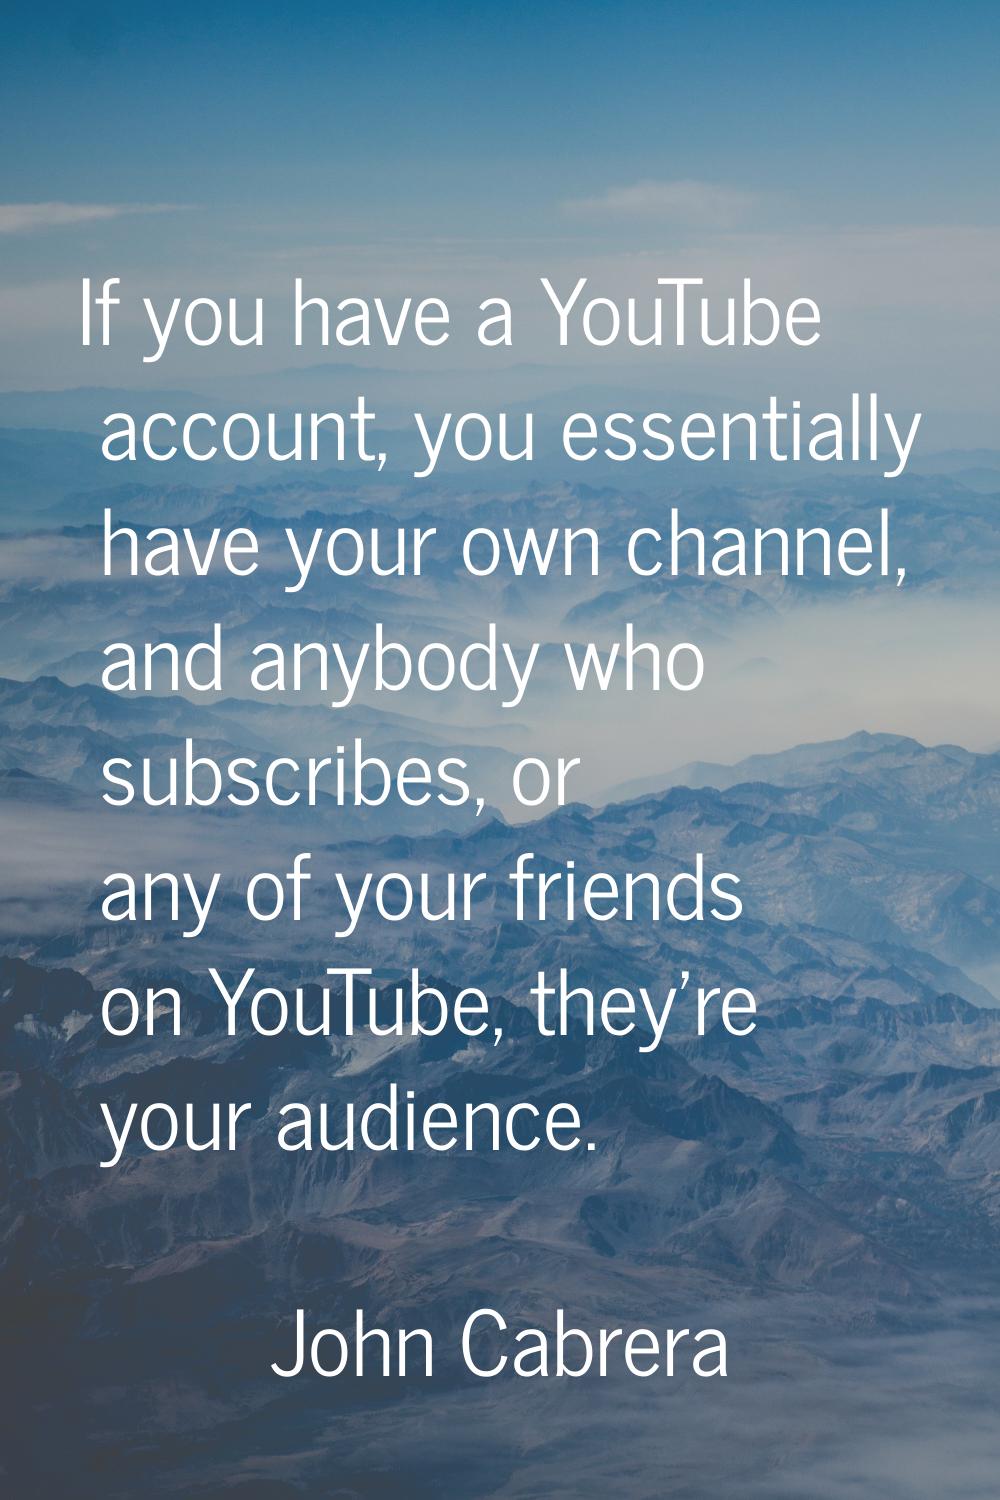 If you have a YouTube account, you essentially have your own channel, and anybody who subscribes, o